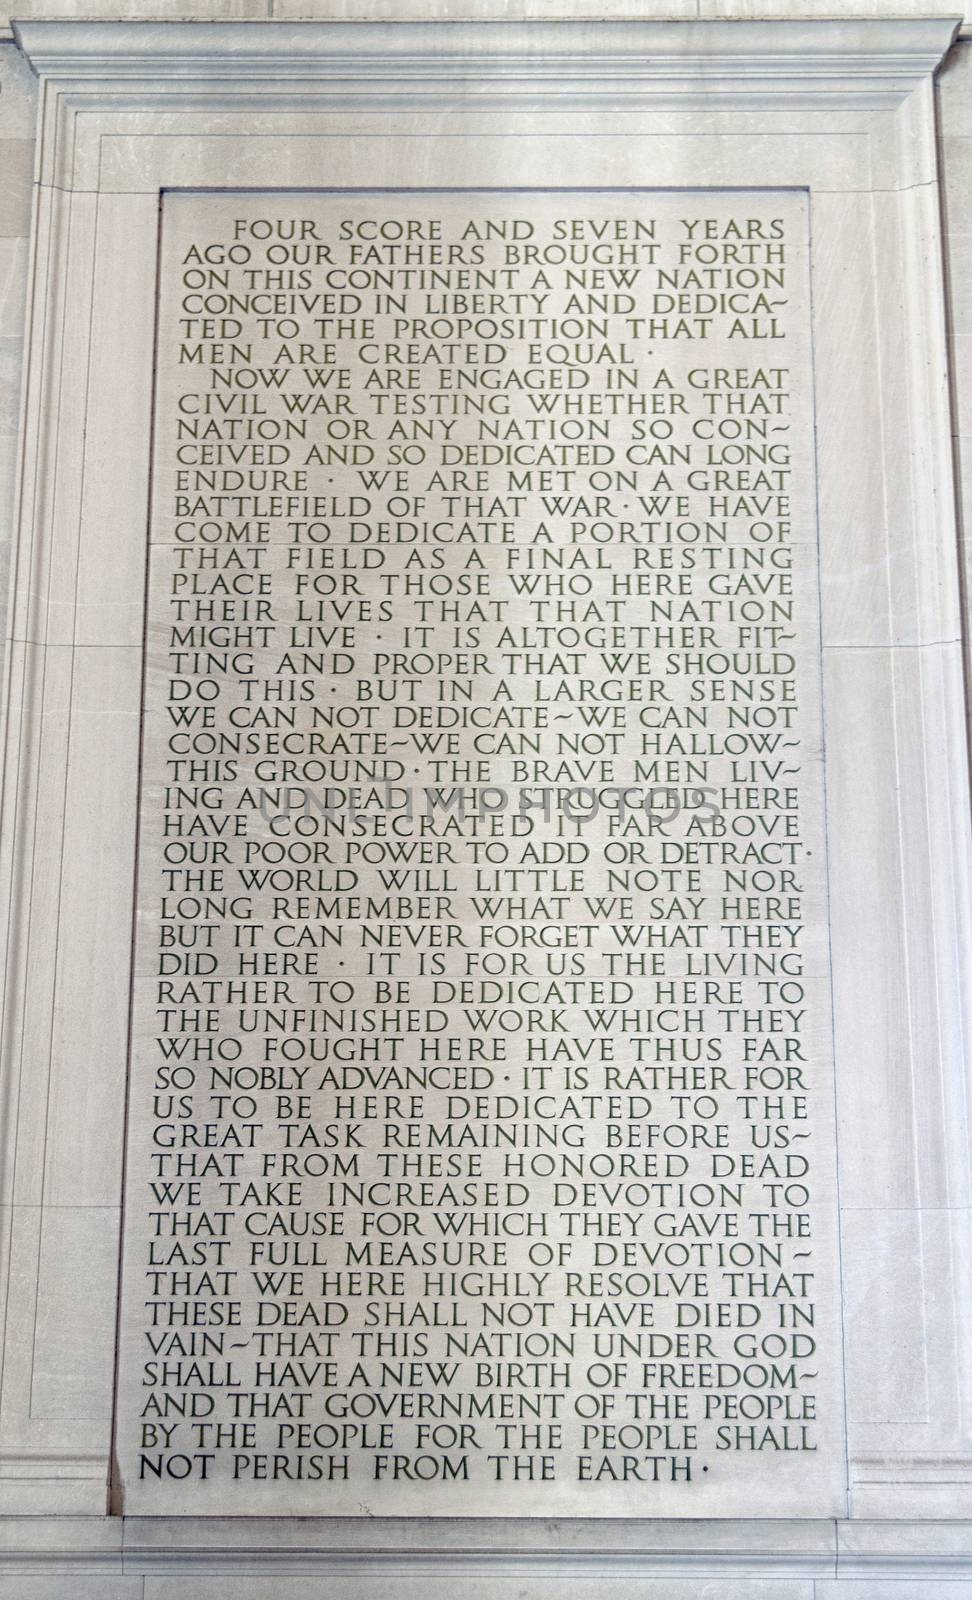 Stone tablet inside the Abraham Lincoln Memorial in Washington D.C.